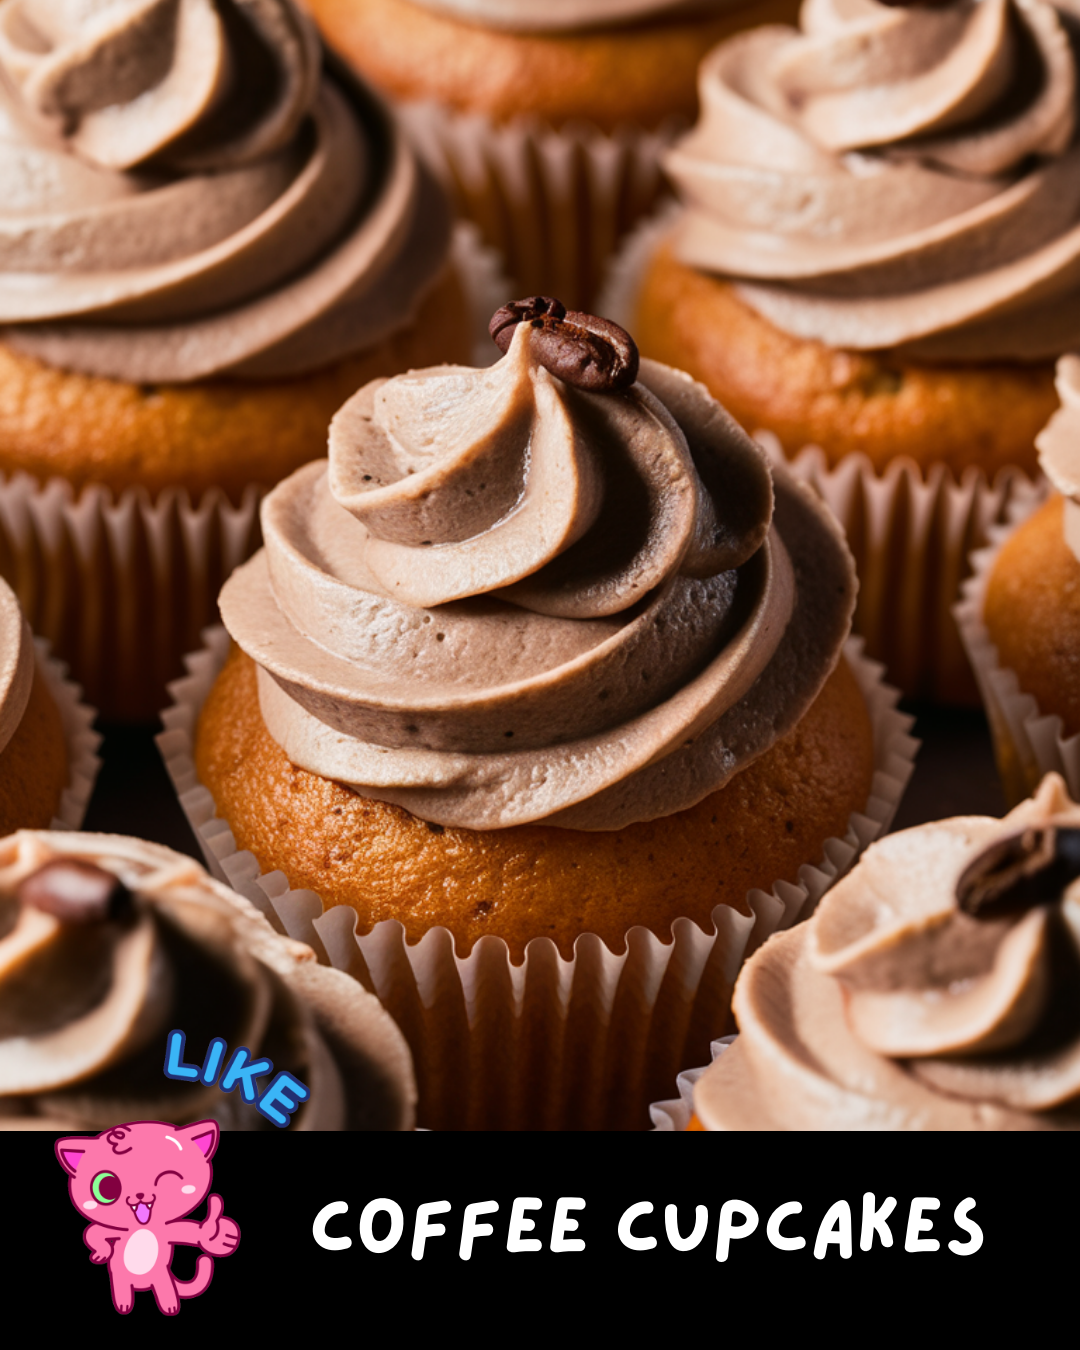 If you love coffee as much as I do, you're going to adore these Coffee Cupcakes! Perfectly moist and topped with a creamy coffee buttercream frosting, they're the ultimate treat for any coffee aficionado. Whether you're enjoying them with your morning brew or as an afternoon pick-me-up, these cupcakes are sure to delight your taste buds.